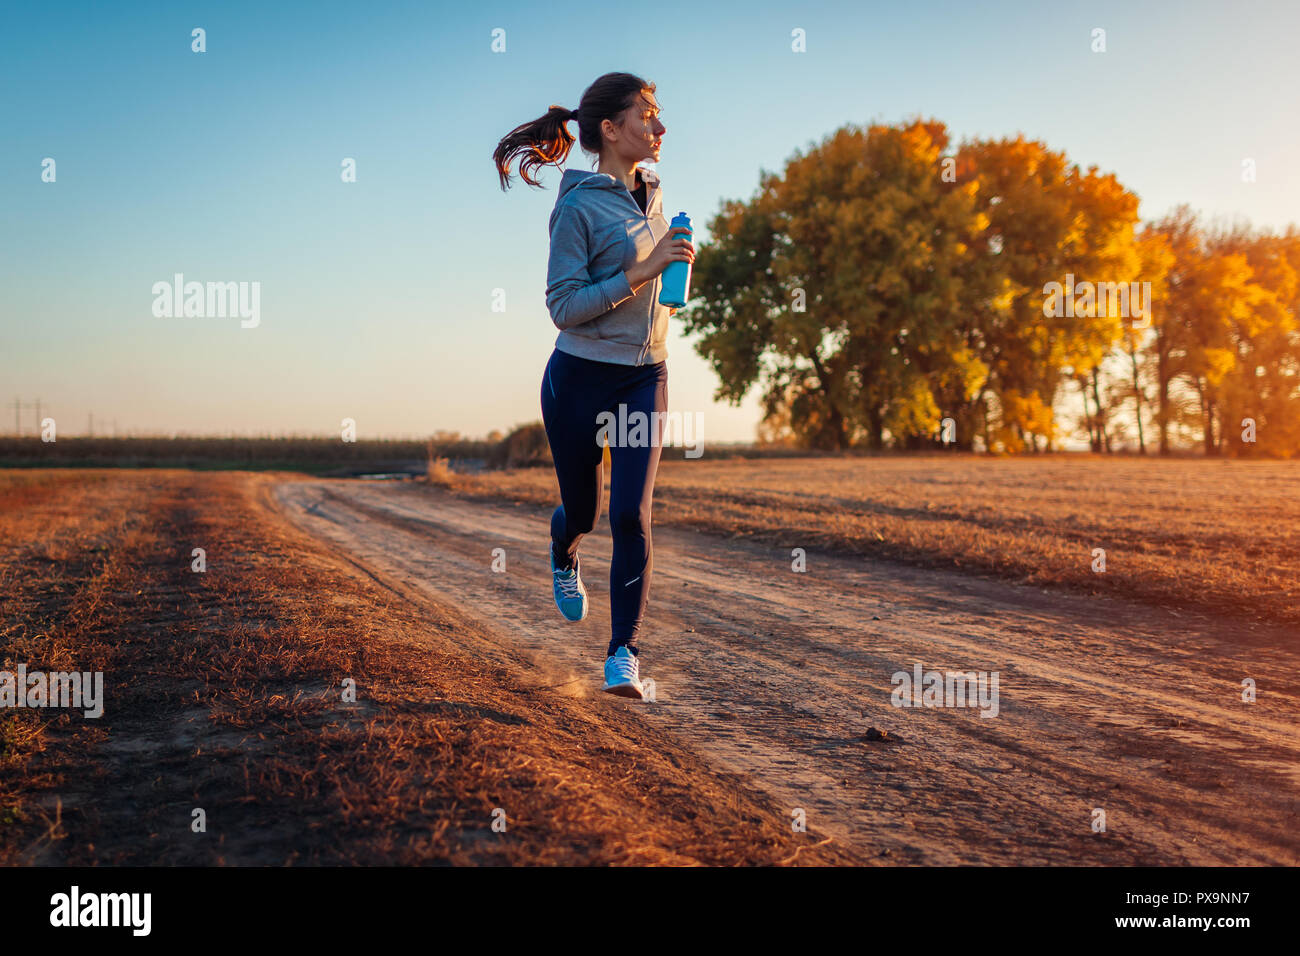 Woman running holding bottle of water in autumn field at sunset. Healthy lifestyle concept. Active sportive people Stock Photo